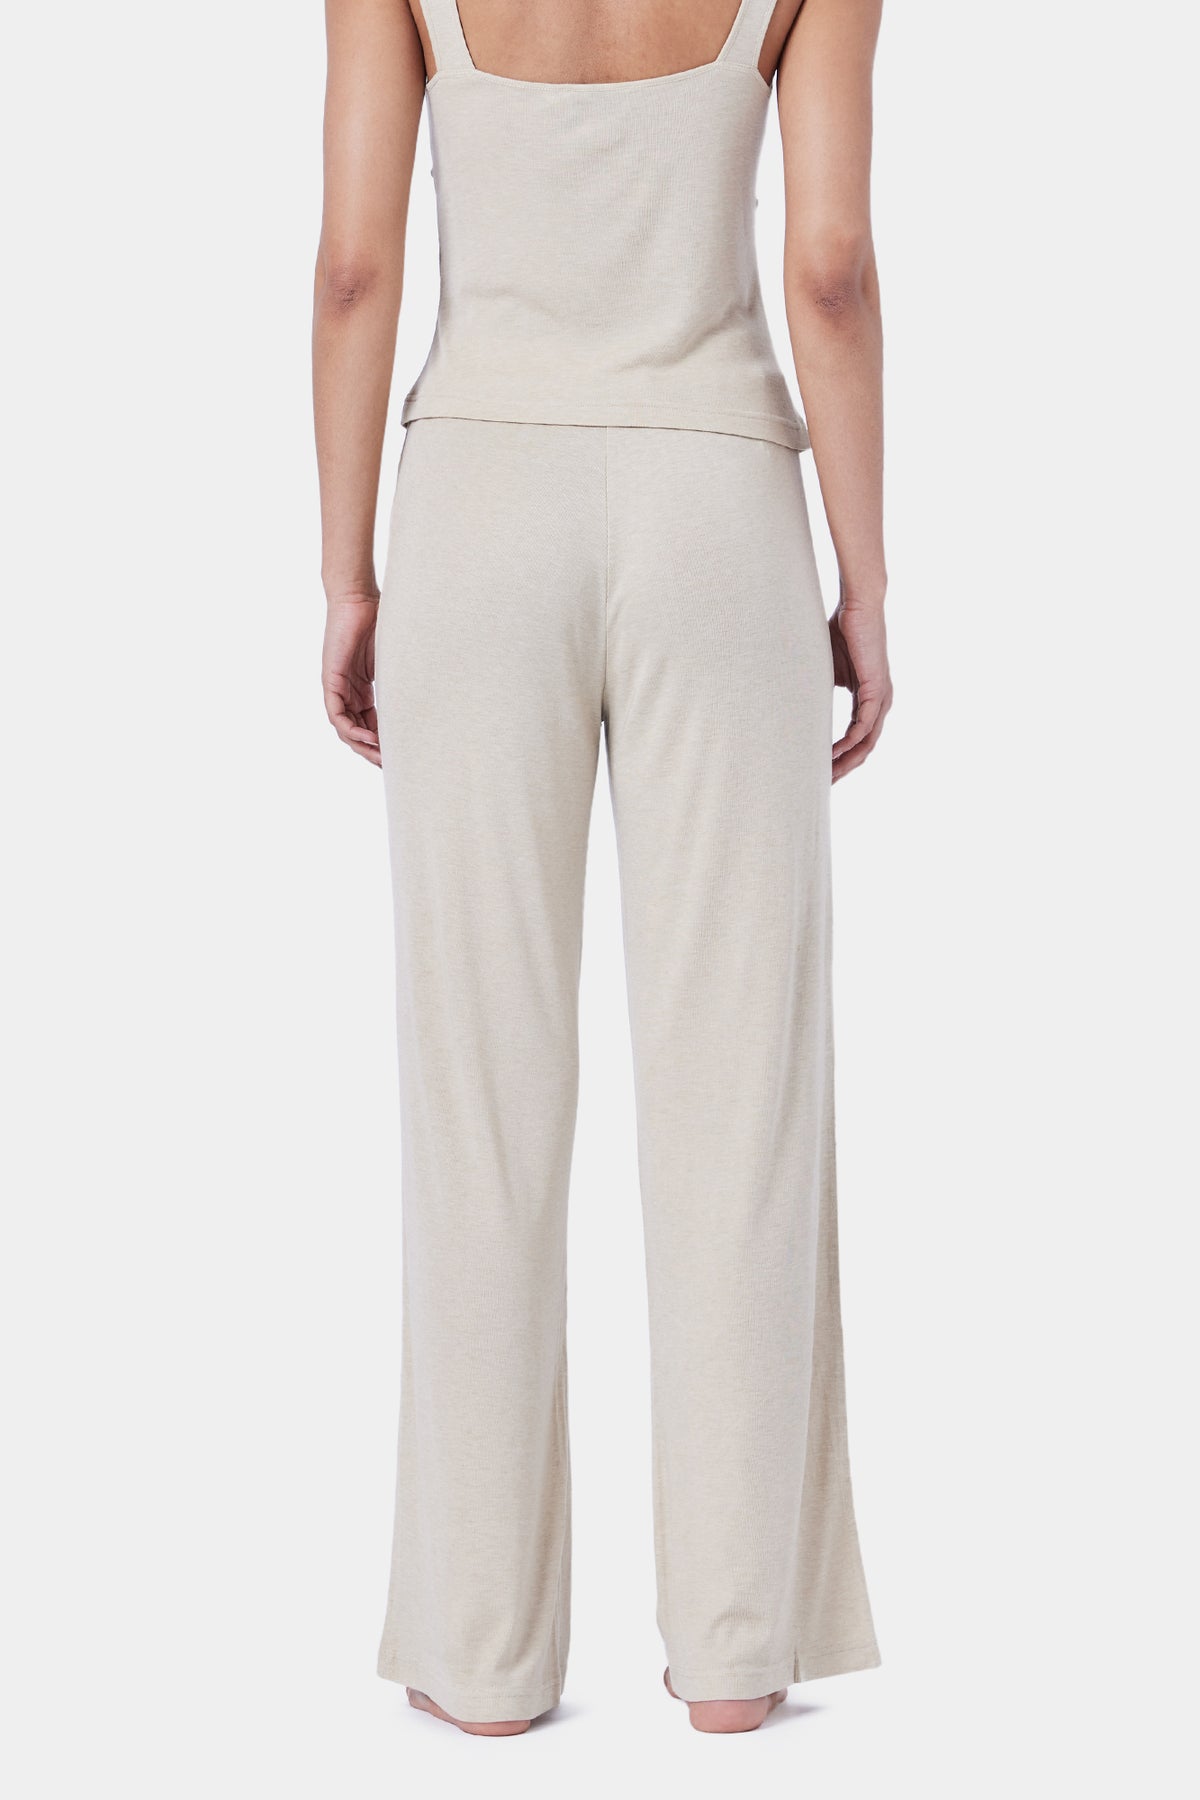 The Delilah Pant By GINIA In Oat